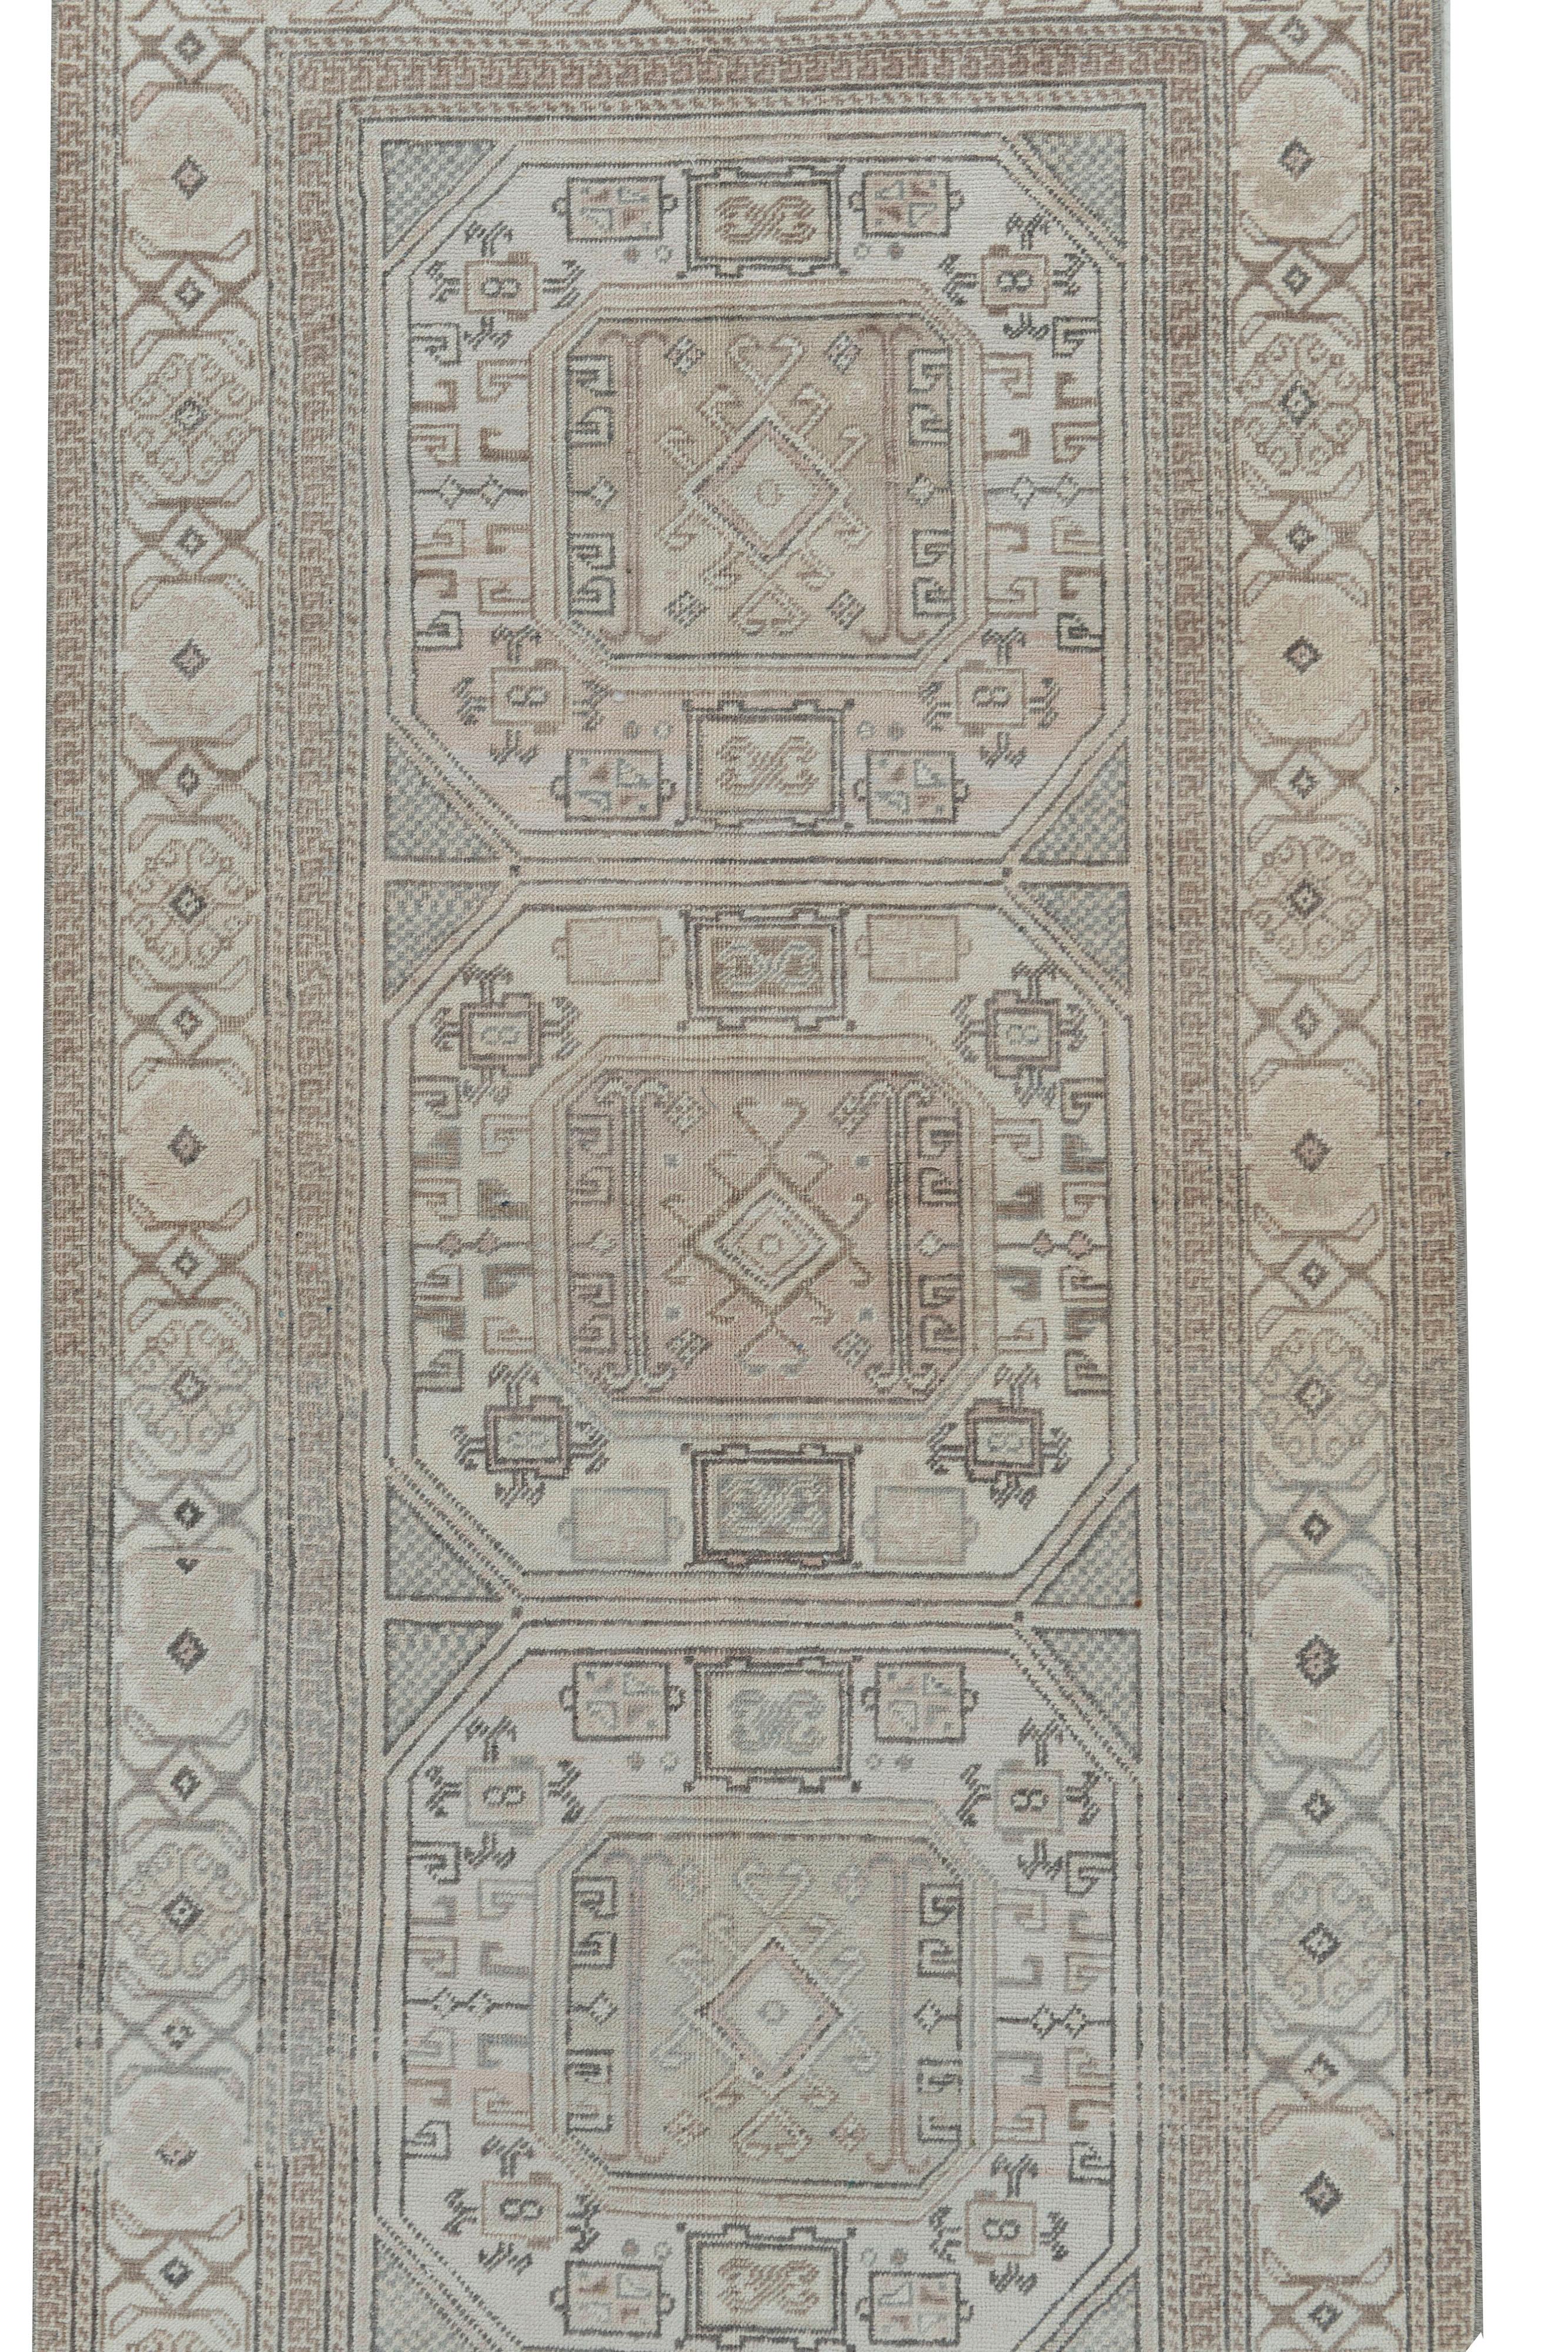 Vintage Turkish Oushak Area Rug 2' X 6'. These attractive rugs are suitable for a wide variety of places, but the significant effect of Oushaks is that they bring space together, making it cozy and warm. The artistic technique of weaving Oushak's